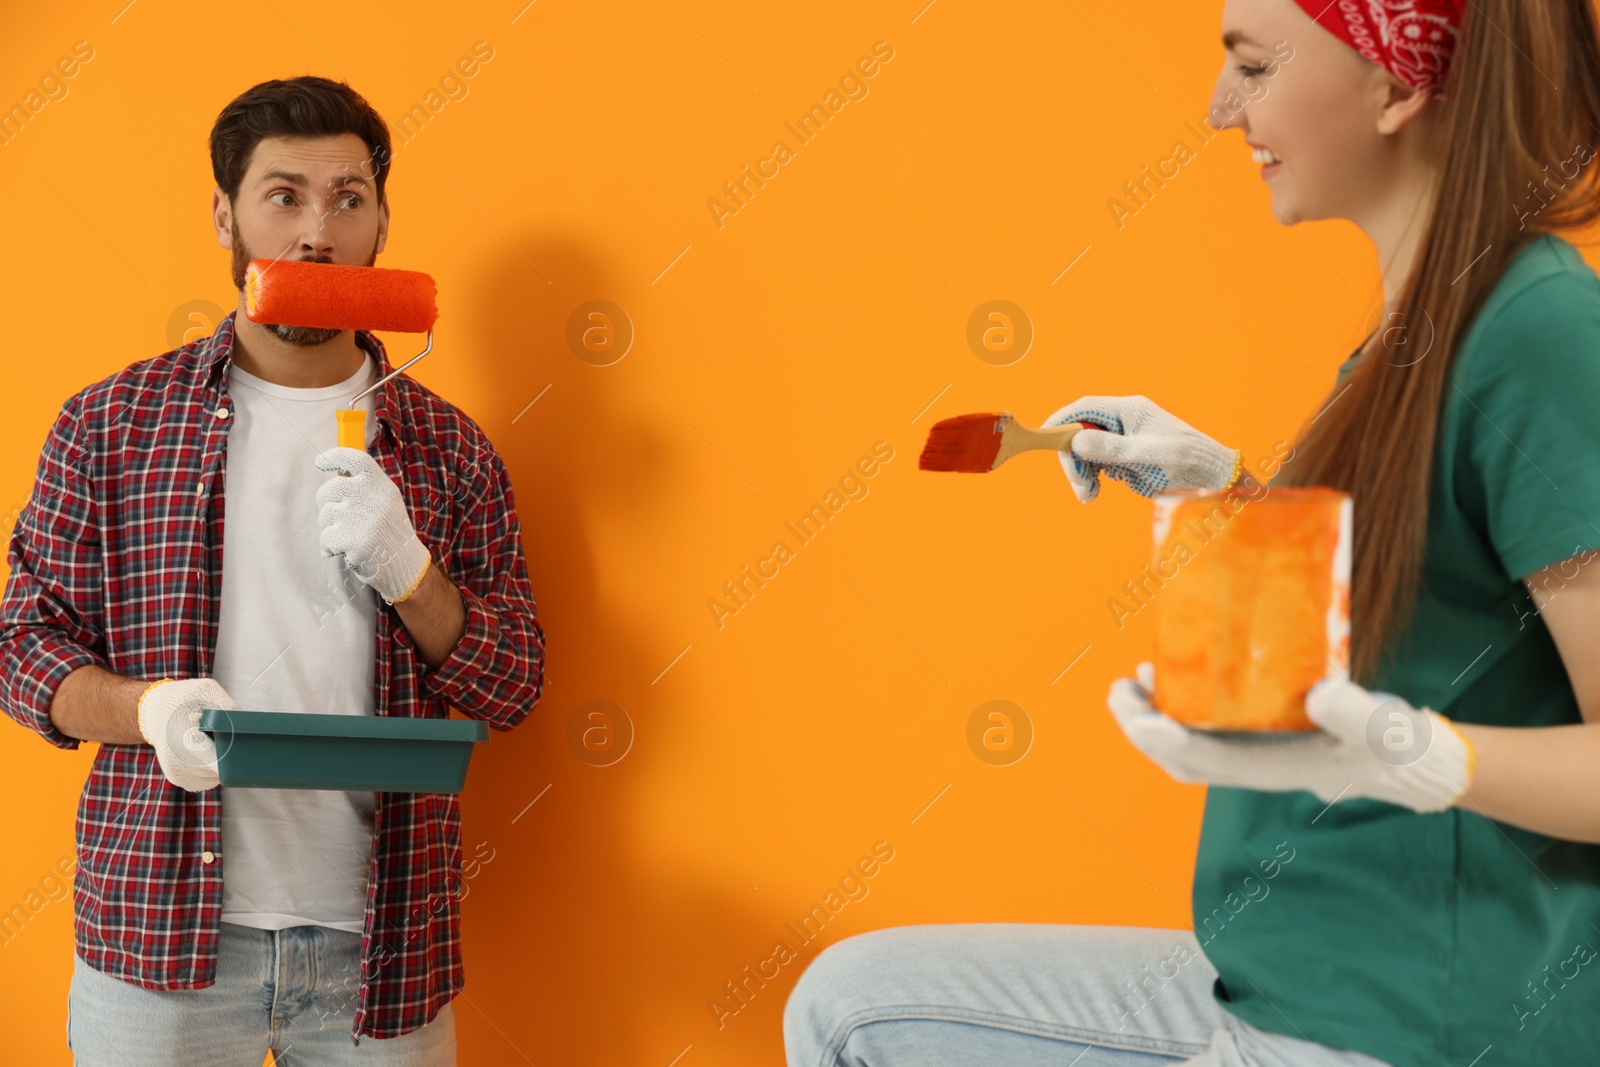 Photo of Man making funny face expression with roller and woman holding can of dye near freshly painted orange wall. Interior design